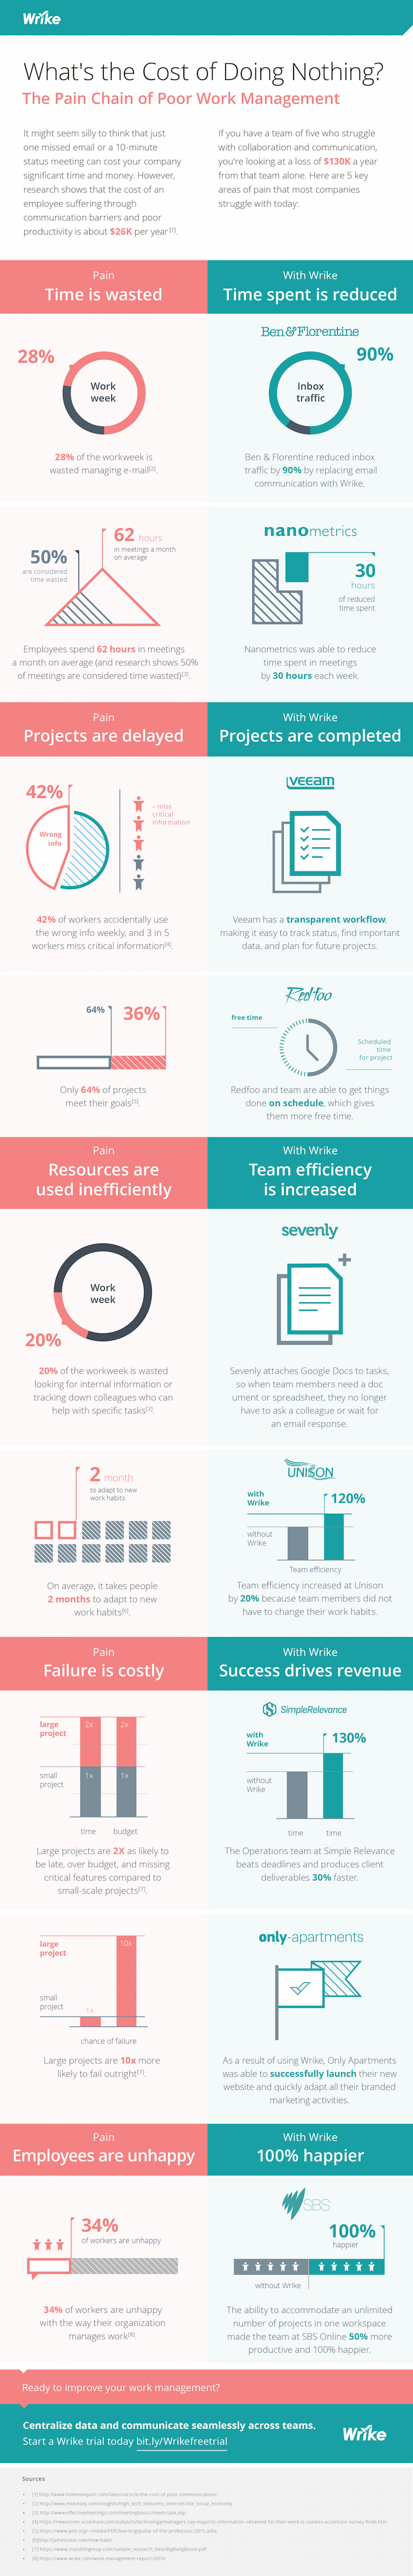 The High Cost of Doing Nothing to Improve Your Work Management (#infographic)